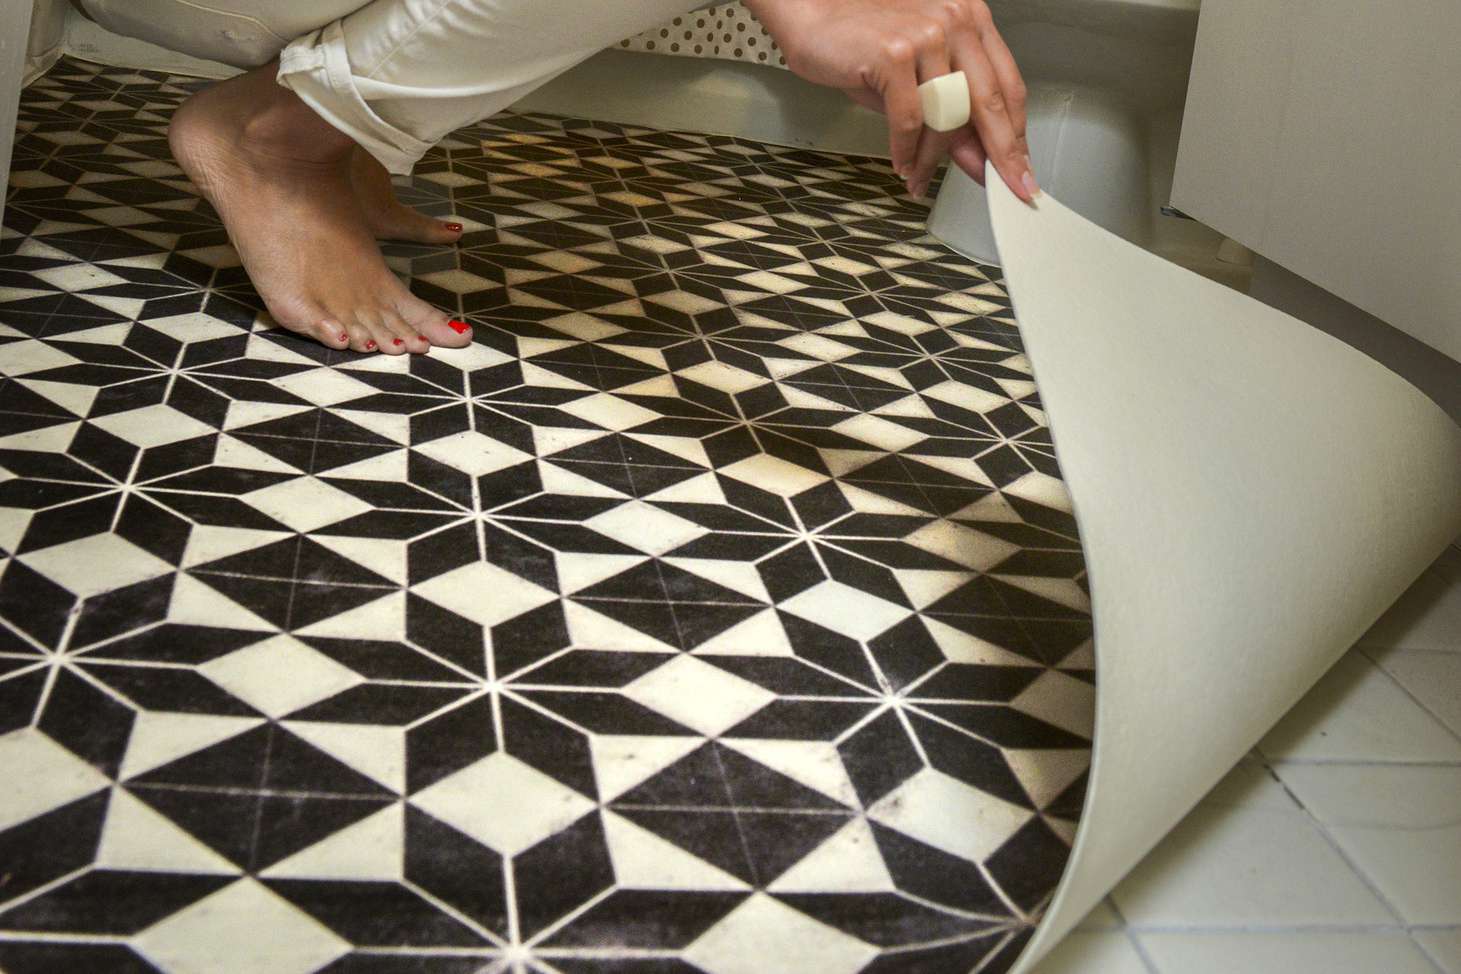 How To Cover Tile Floor